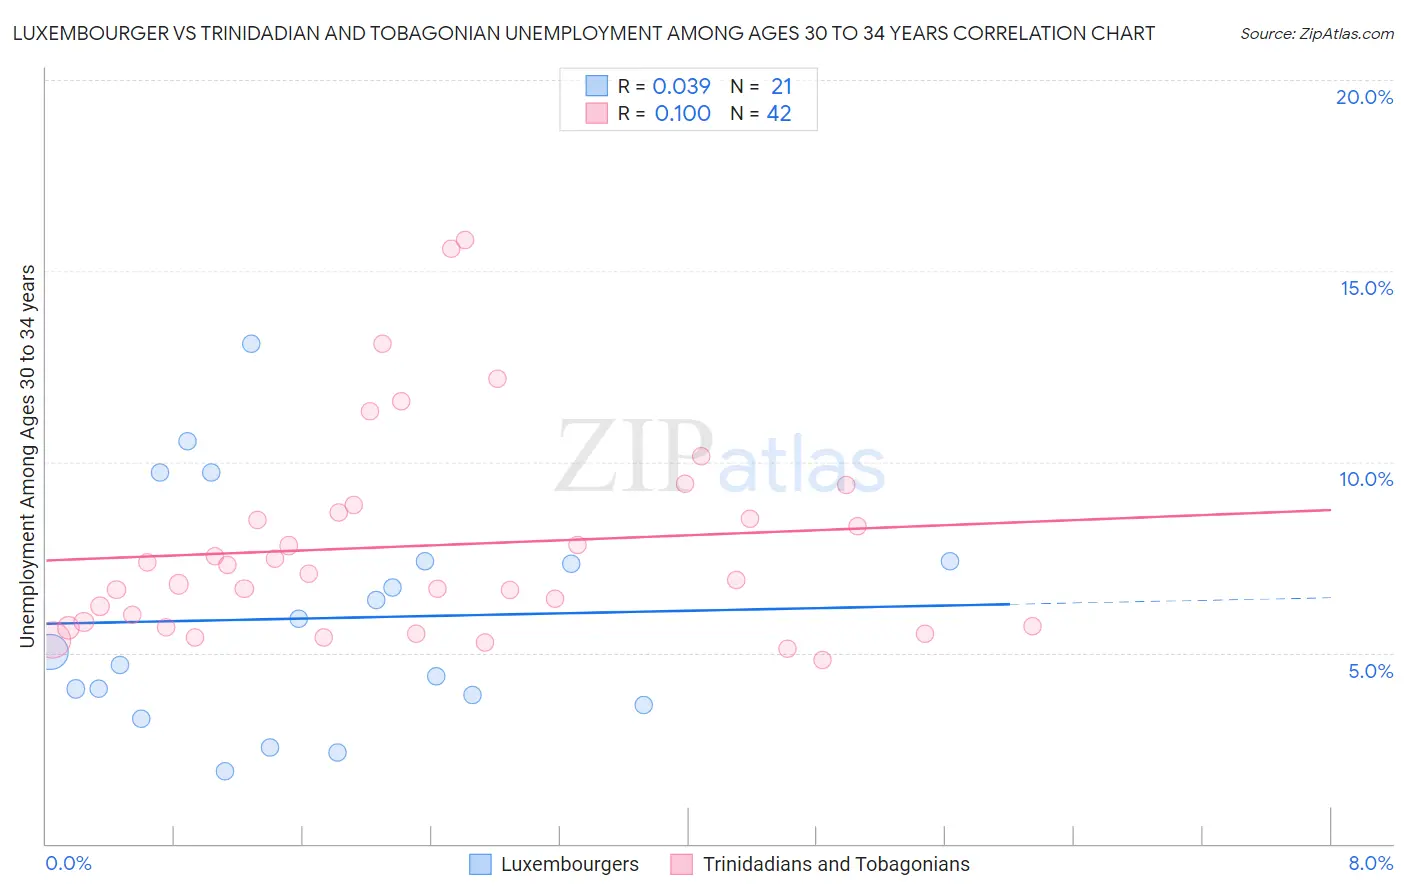 Luxembourger vs Trinidadian and Tobagonian Unemployment Among Ages 30 to 34 years